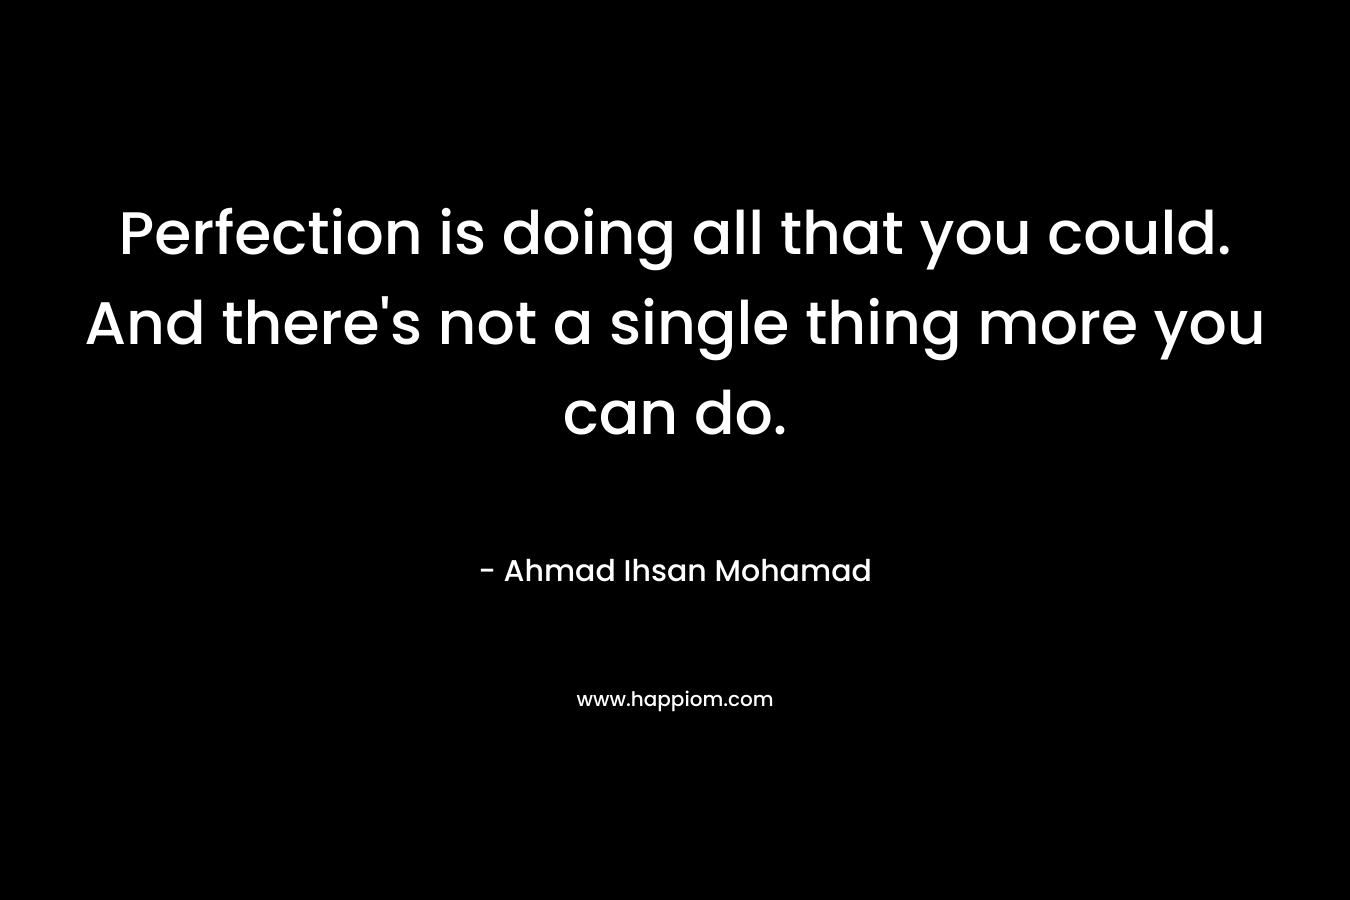 Perfection is doing all that you could. And there's not a single thing more you can do.